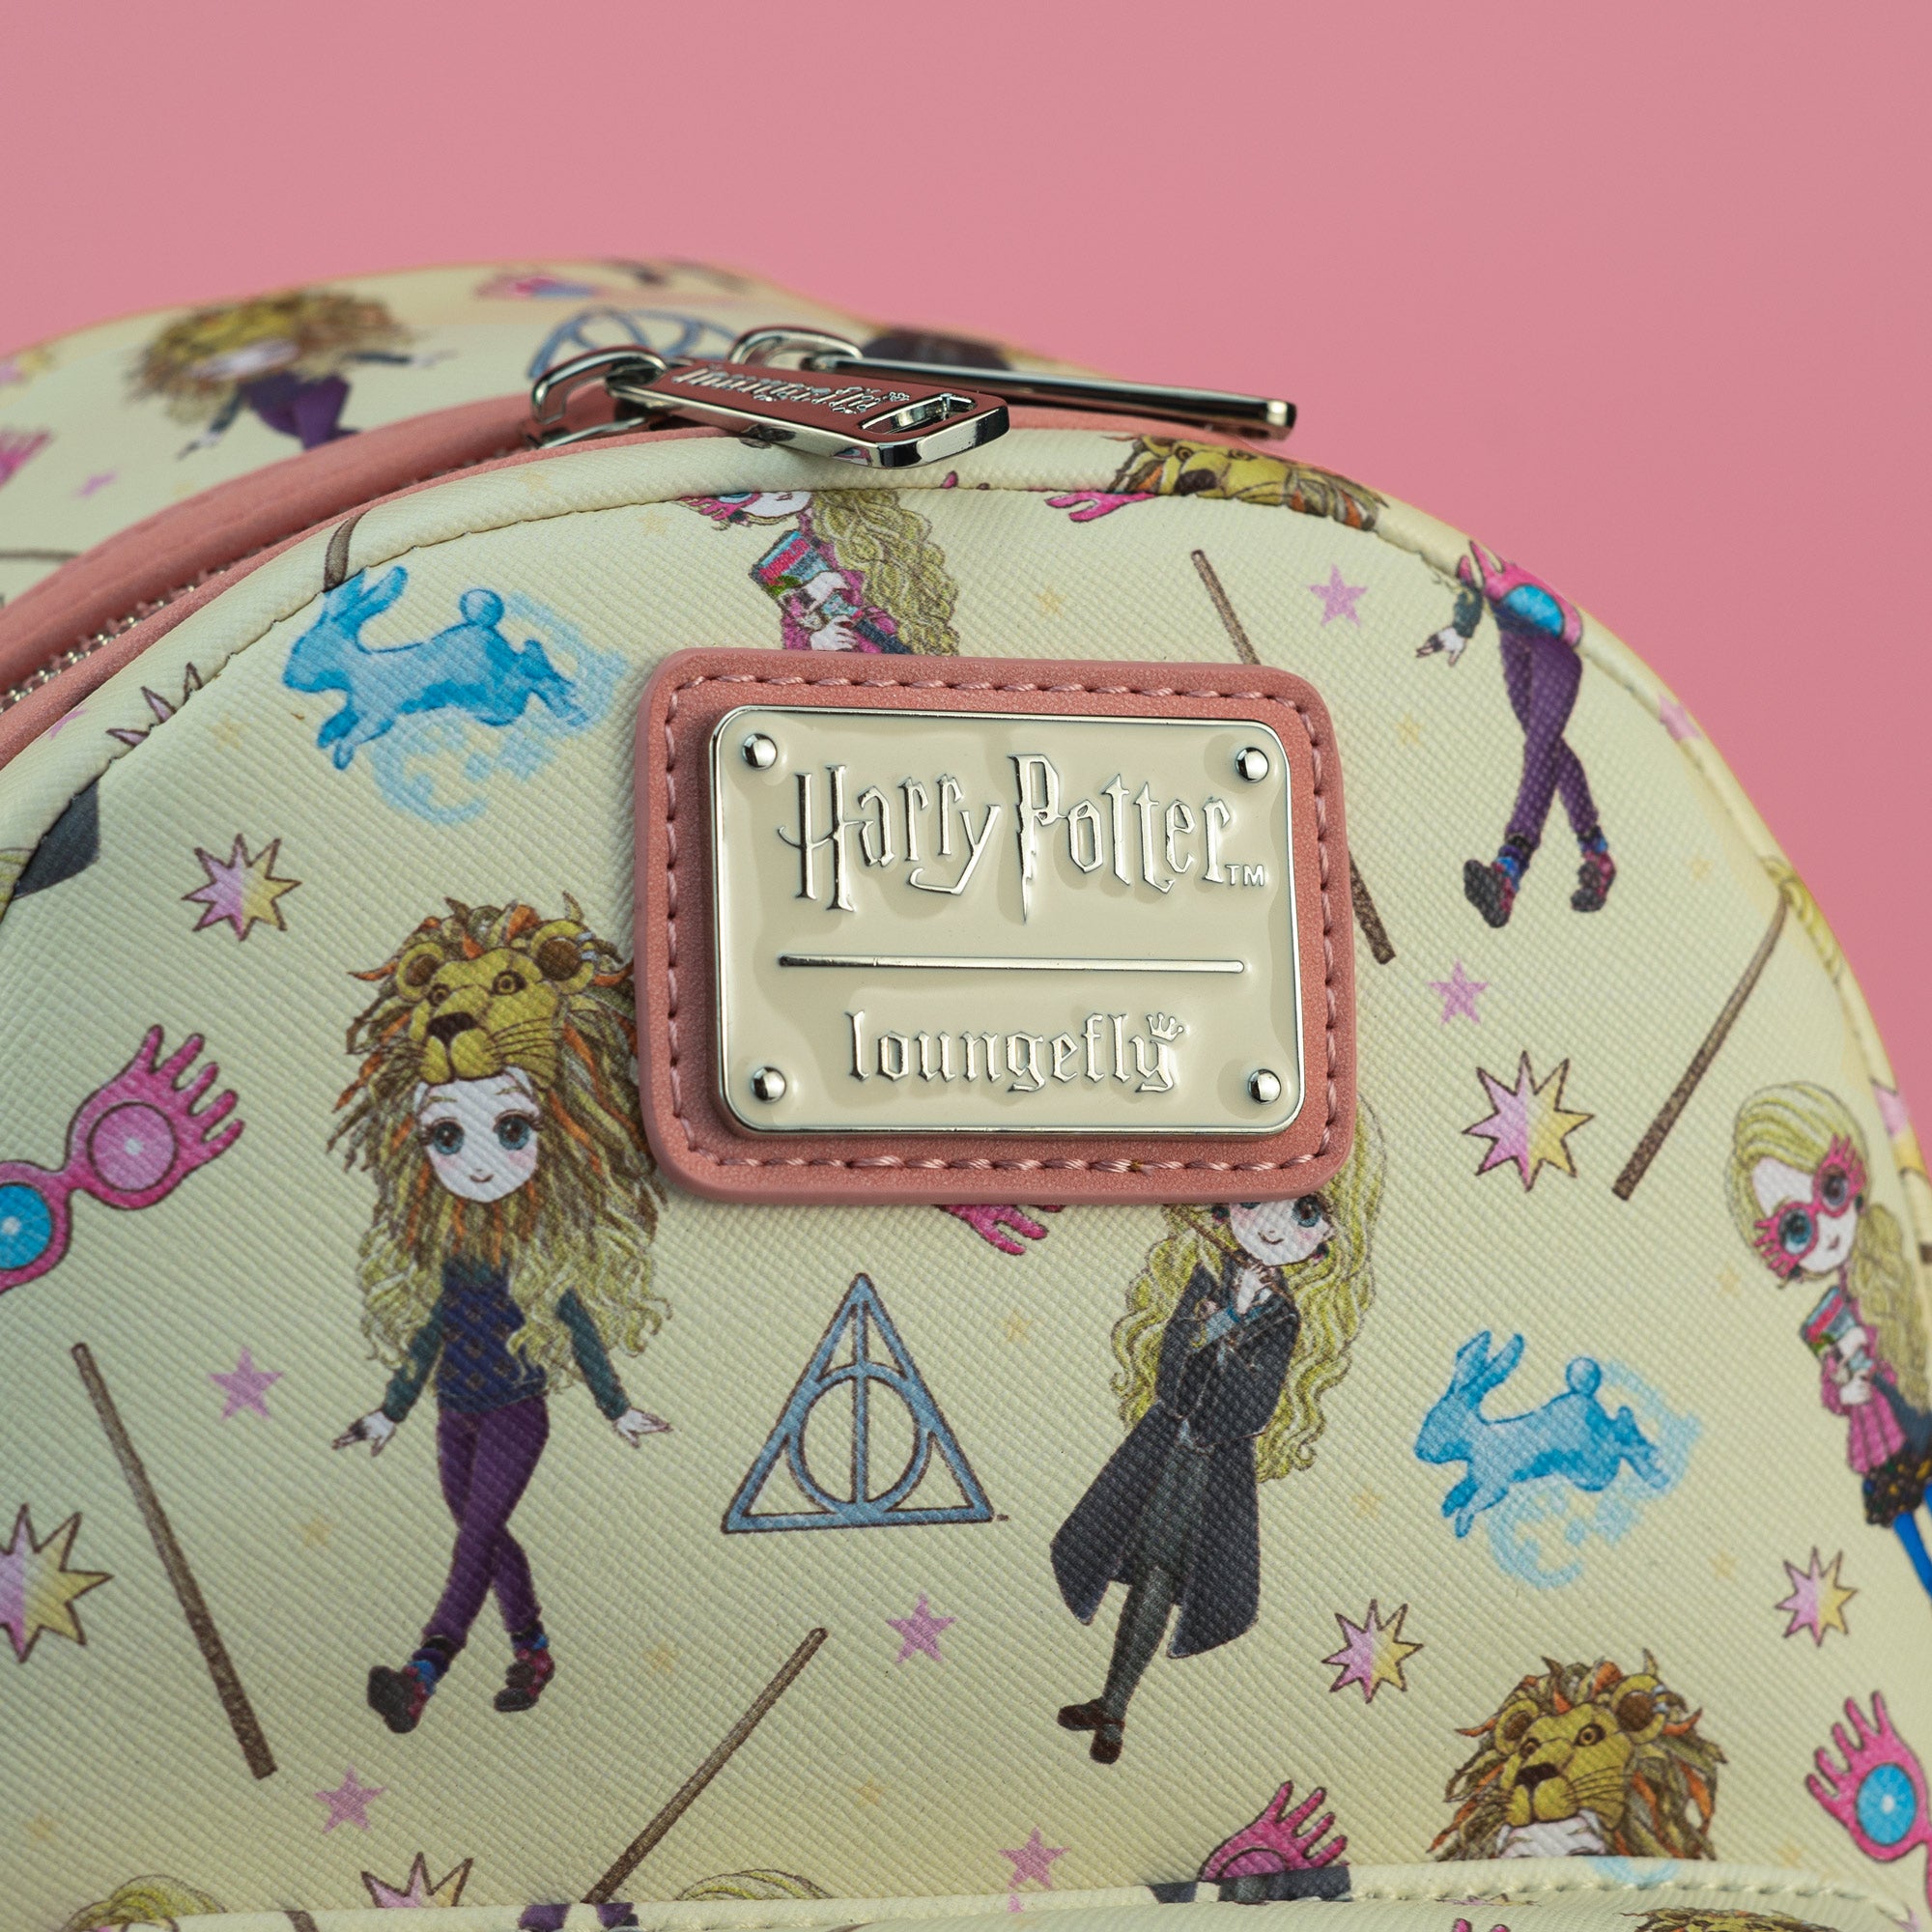 Loungefly x Harry Potter Luna Lovegood All Over Print Mini Backpack